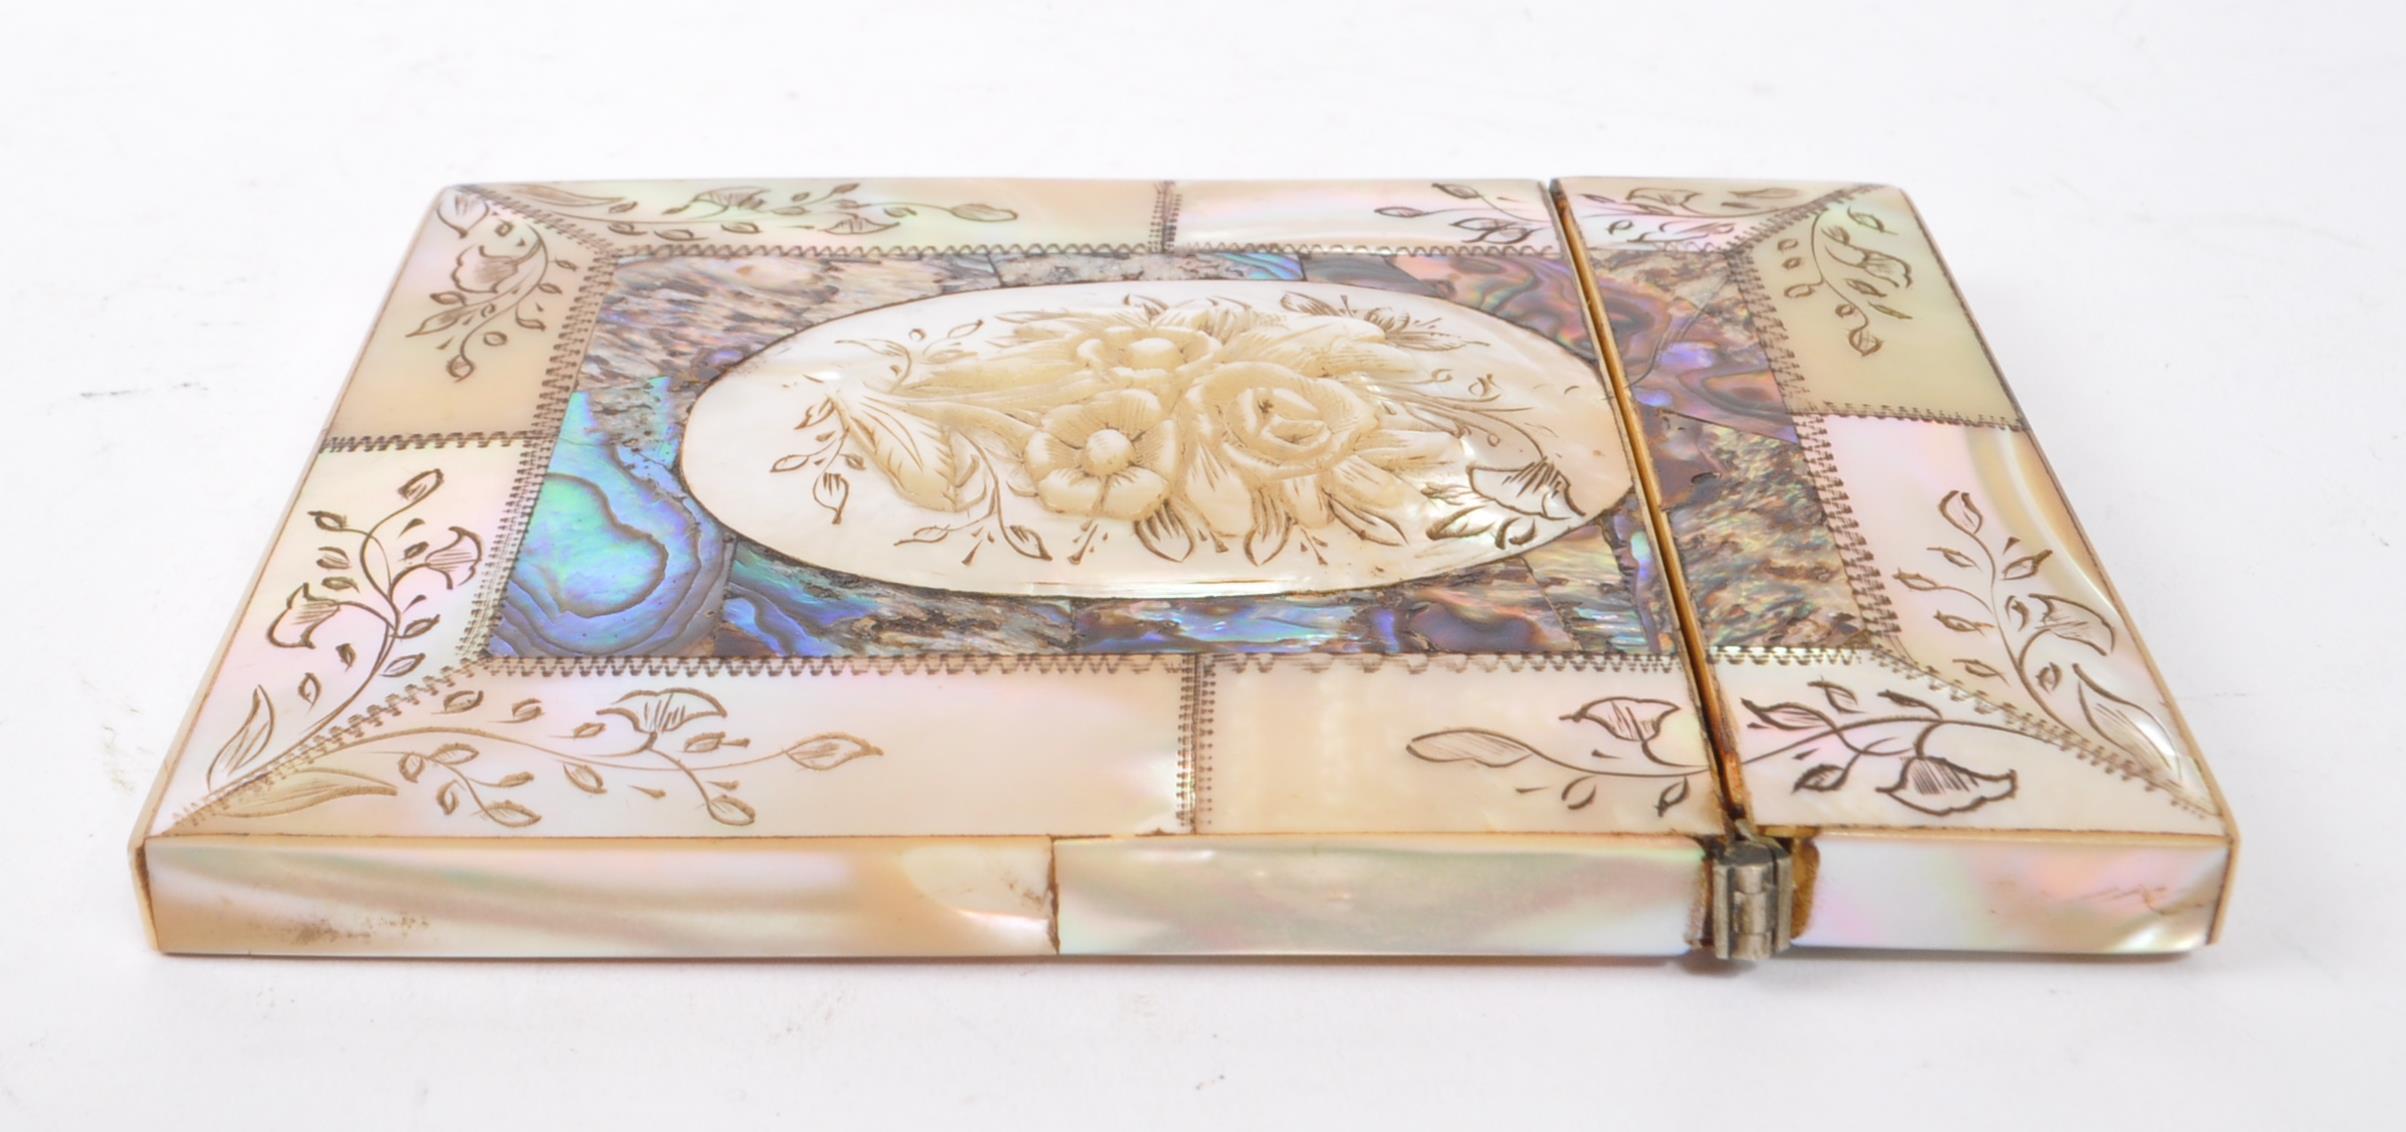 19TH CENTURY MOTHER OF PEARL CALLING CARD CASE - Image 6 of 6